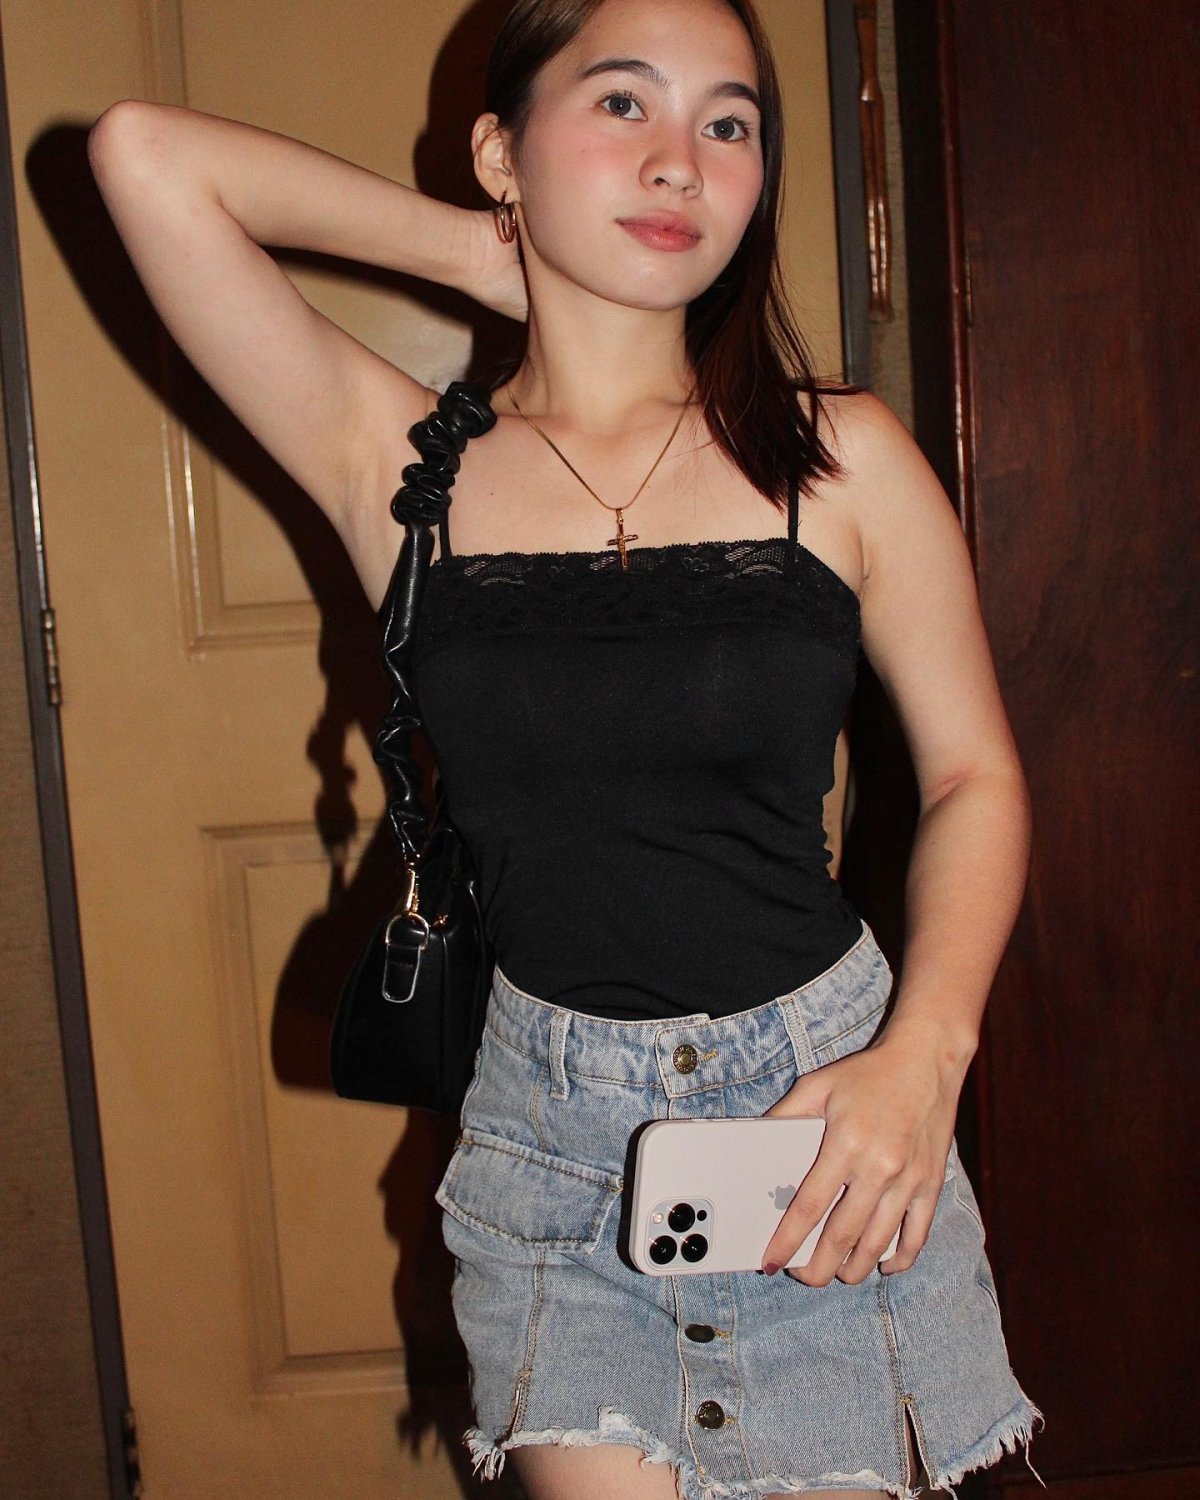 Pinay love to flaunt body and armpit #0pQ2Ixrw